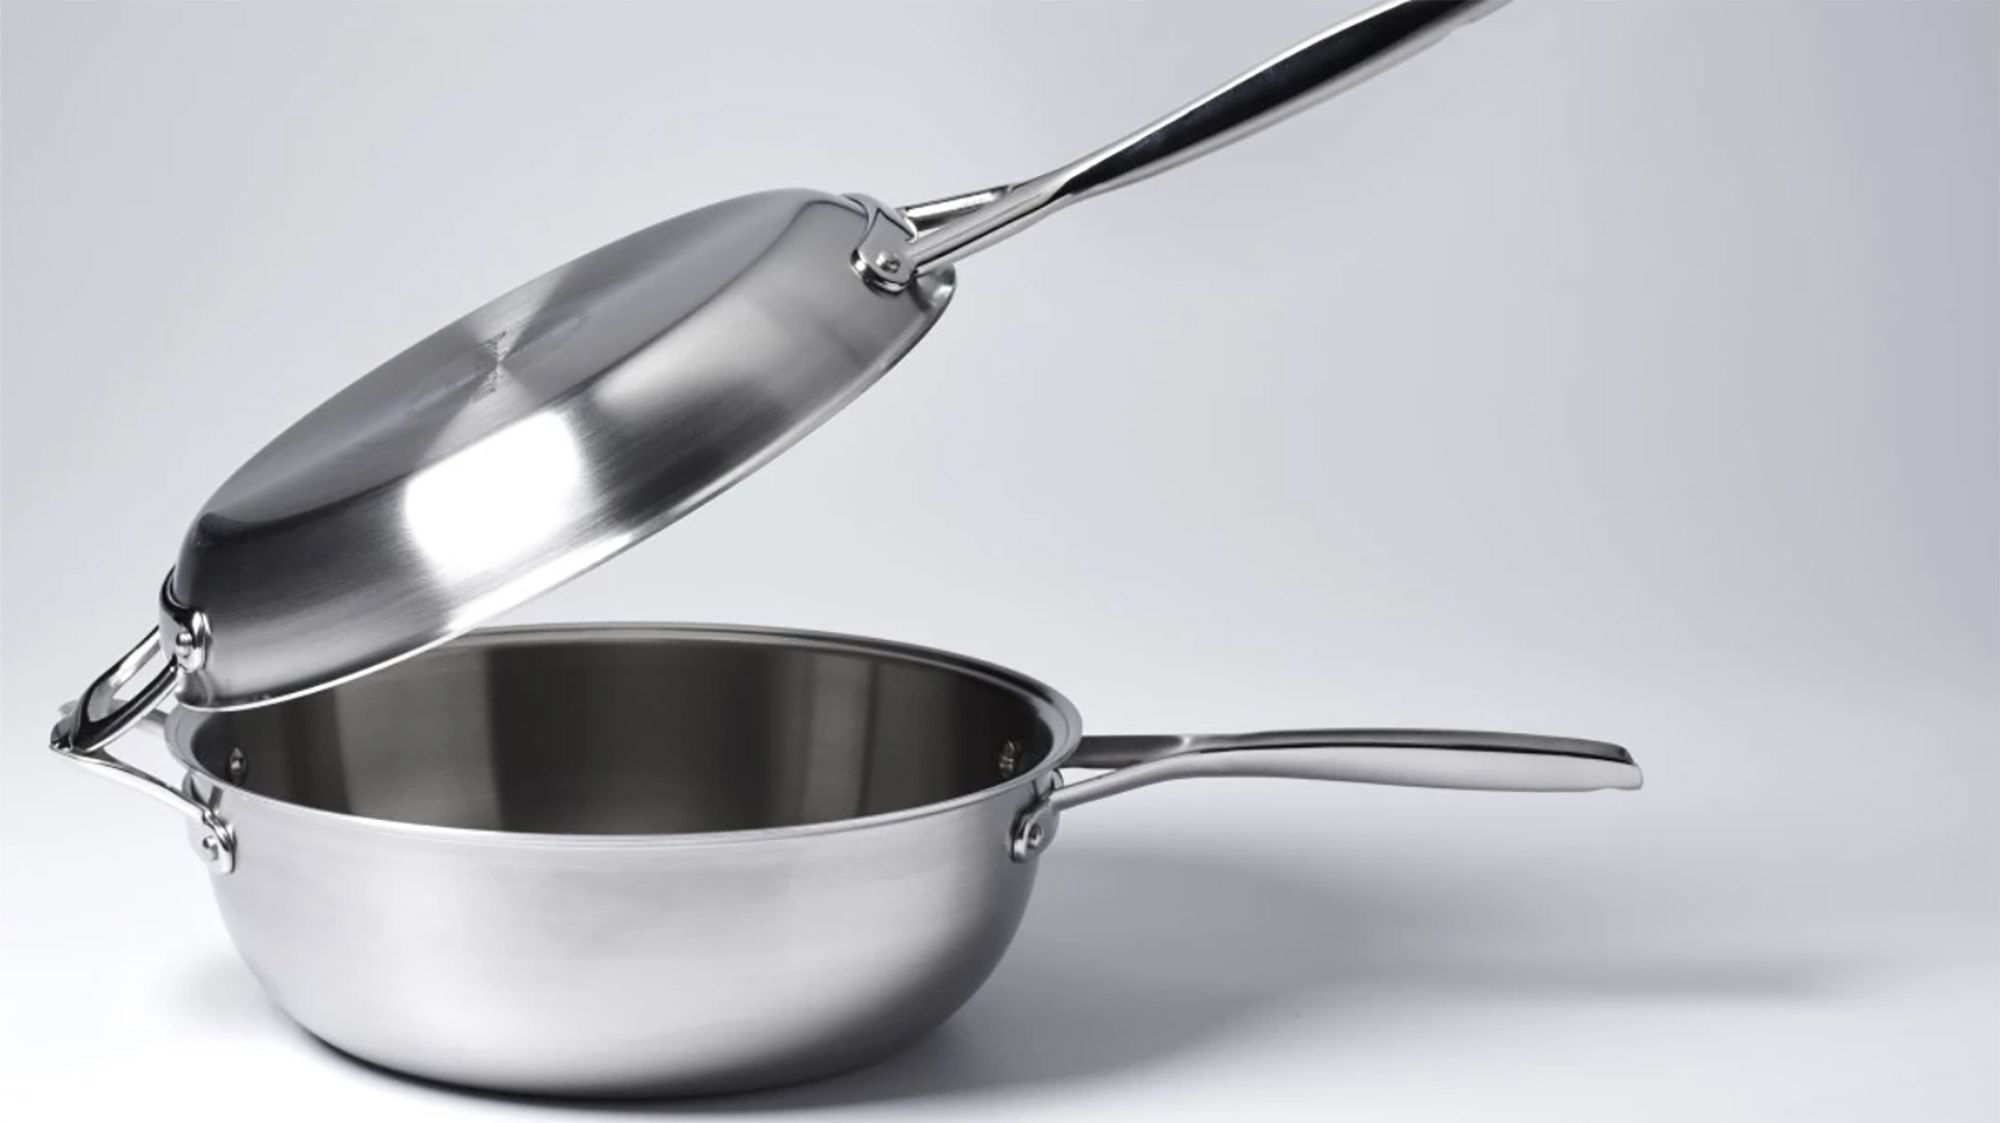 Let's Talk About German Cookware – The Cookware Review